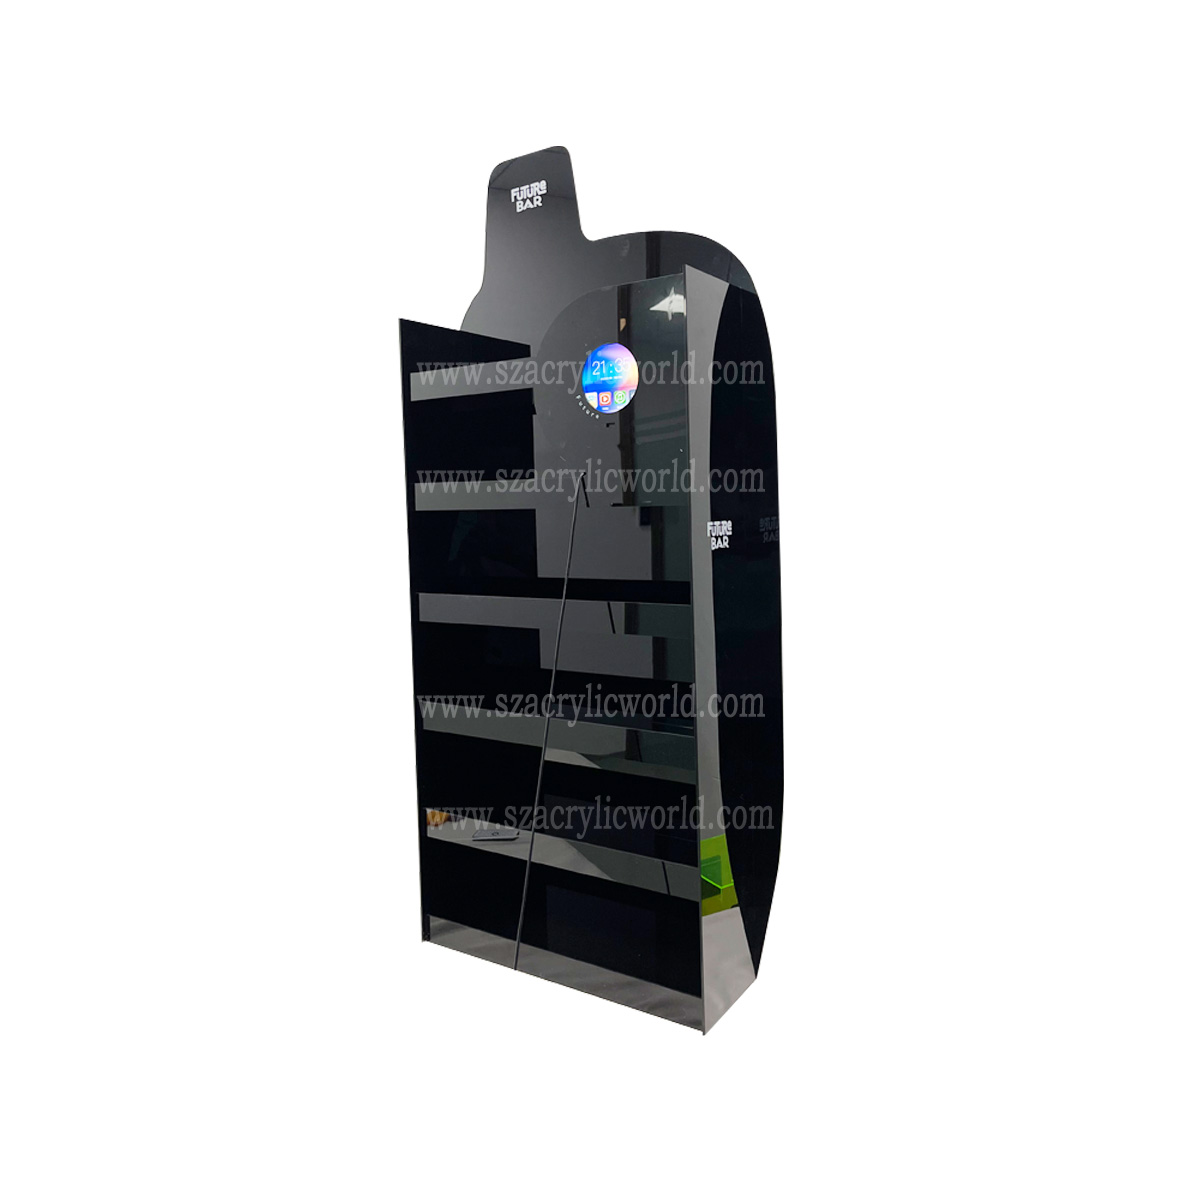 Acrylic World Limited also offers disposable e-cigarette pack display stands